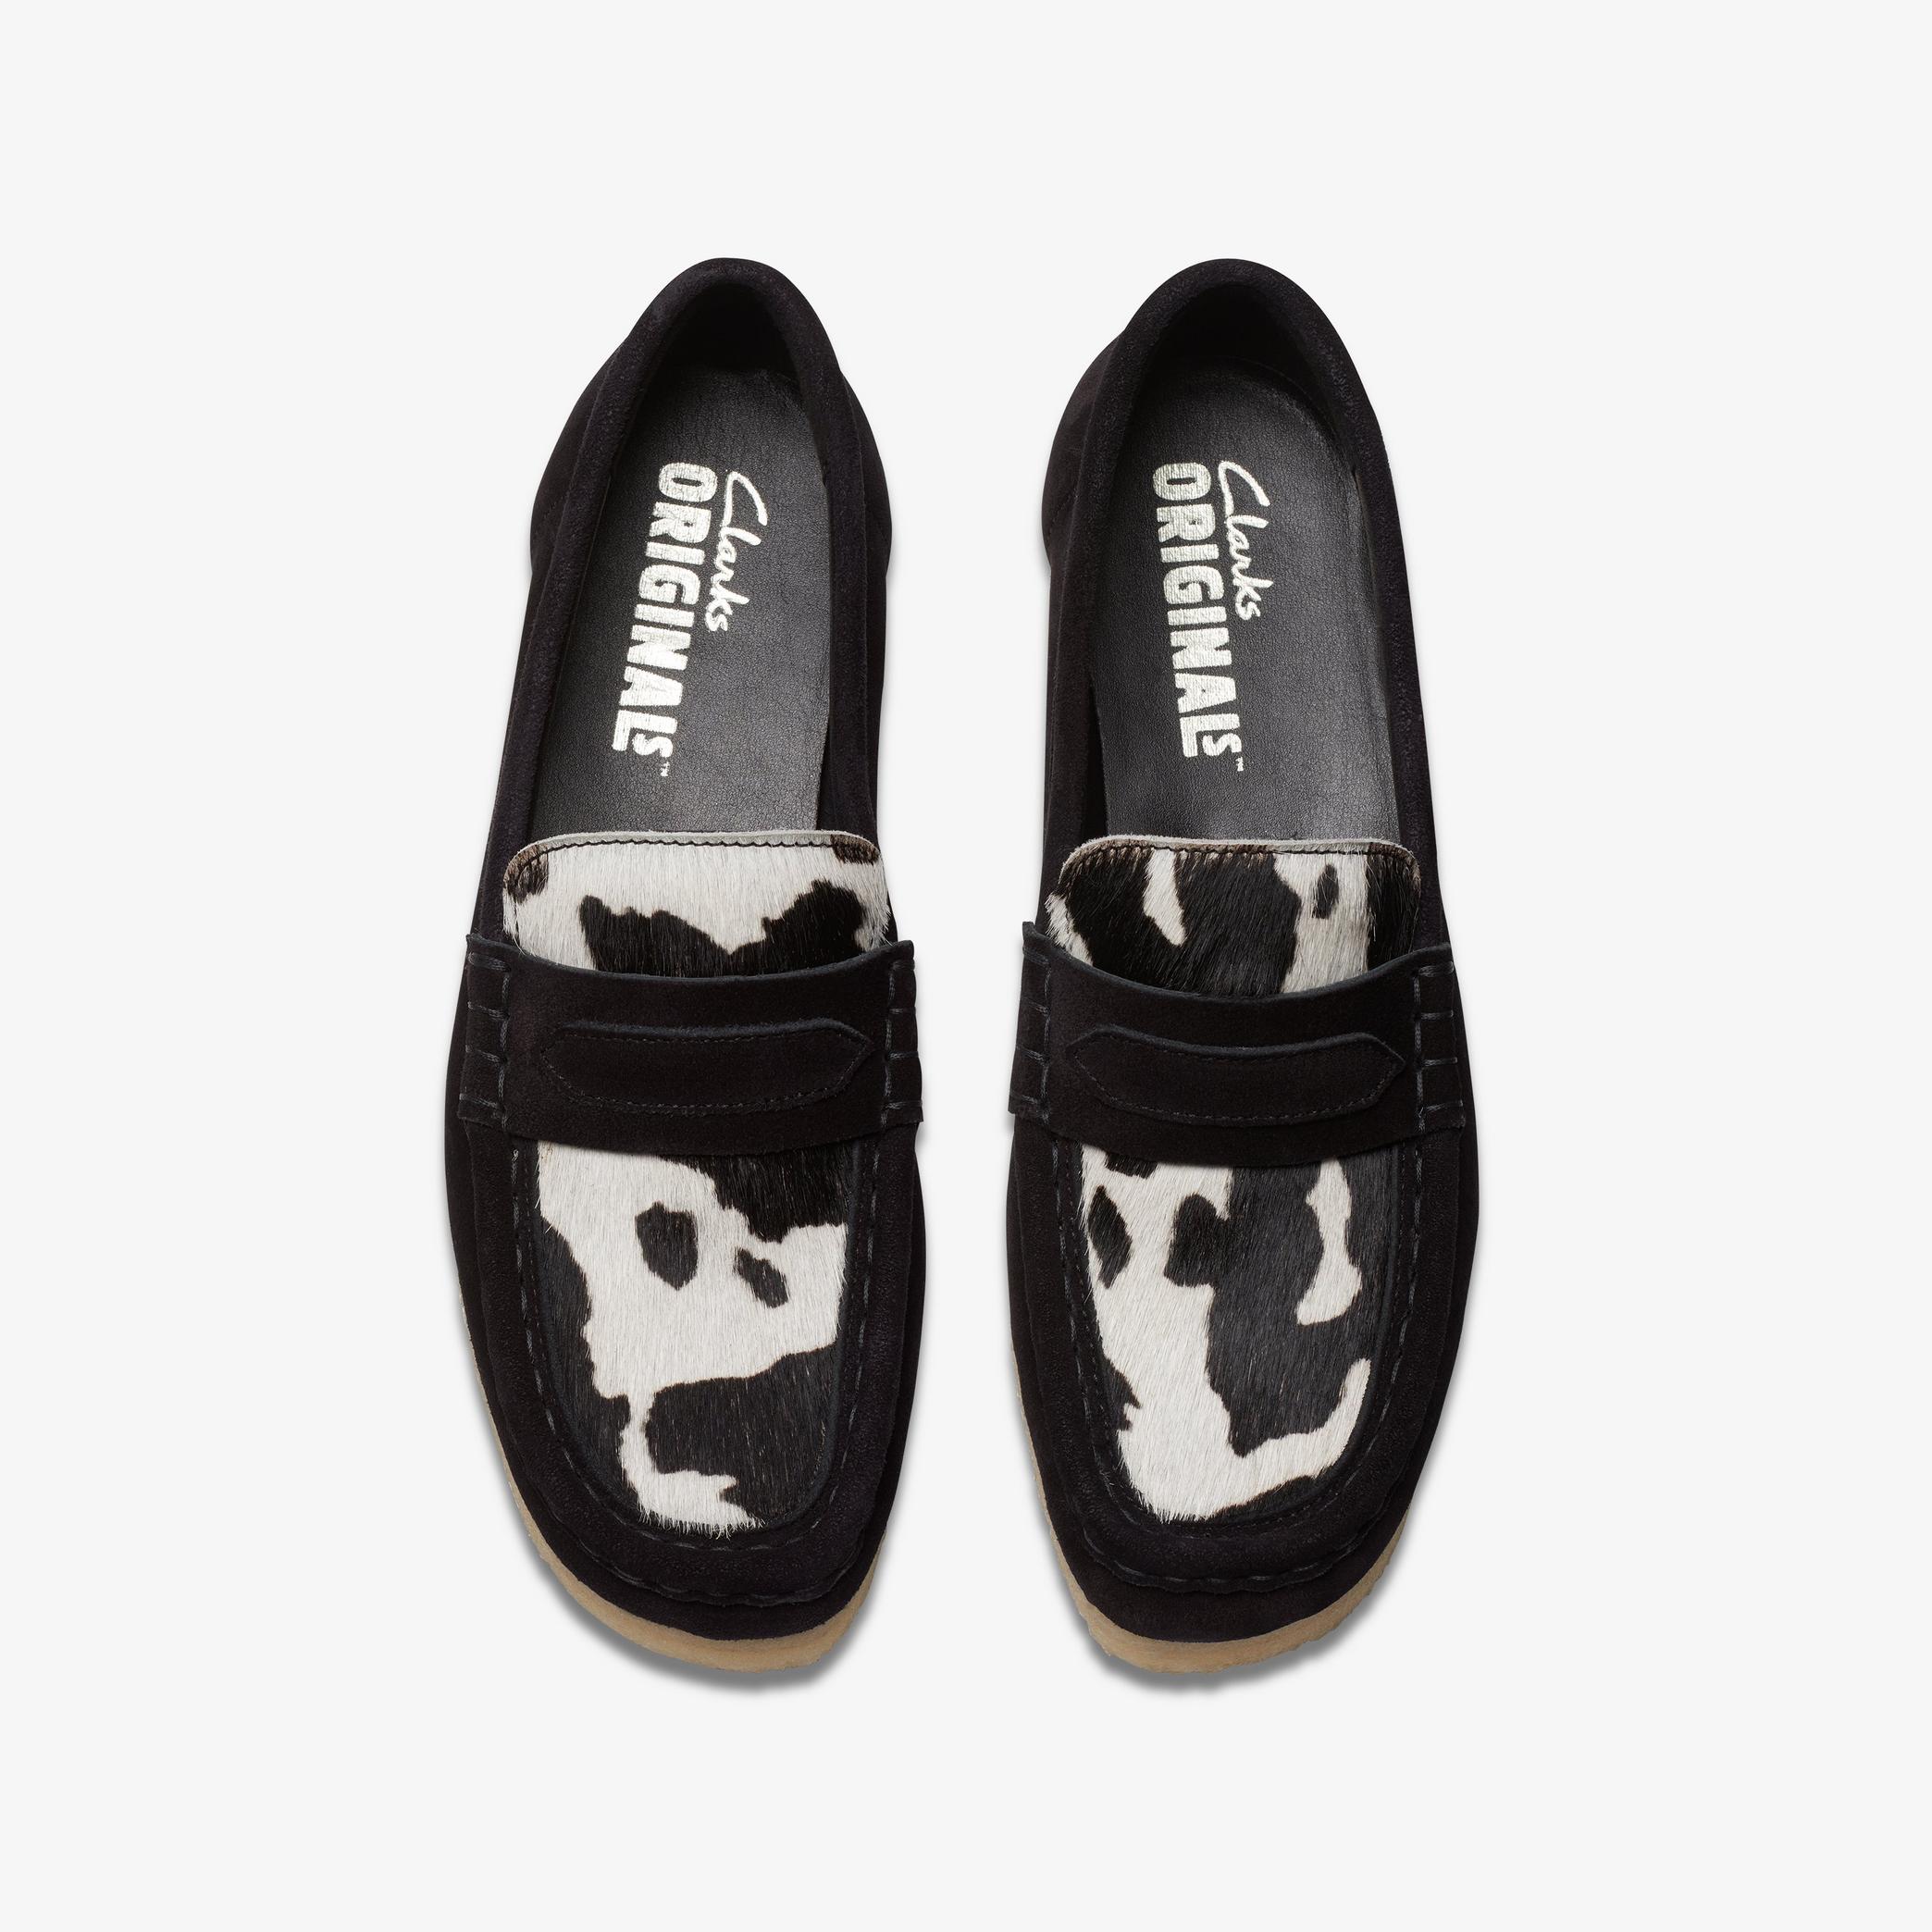 Wallabee Loafer Cow Print HairOn Loafers, view 6 of 7